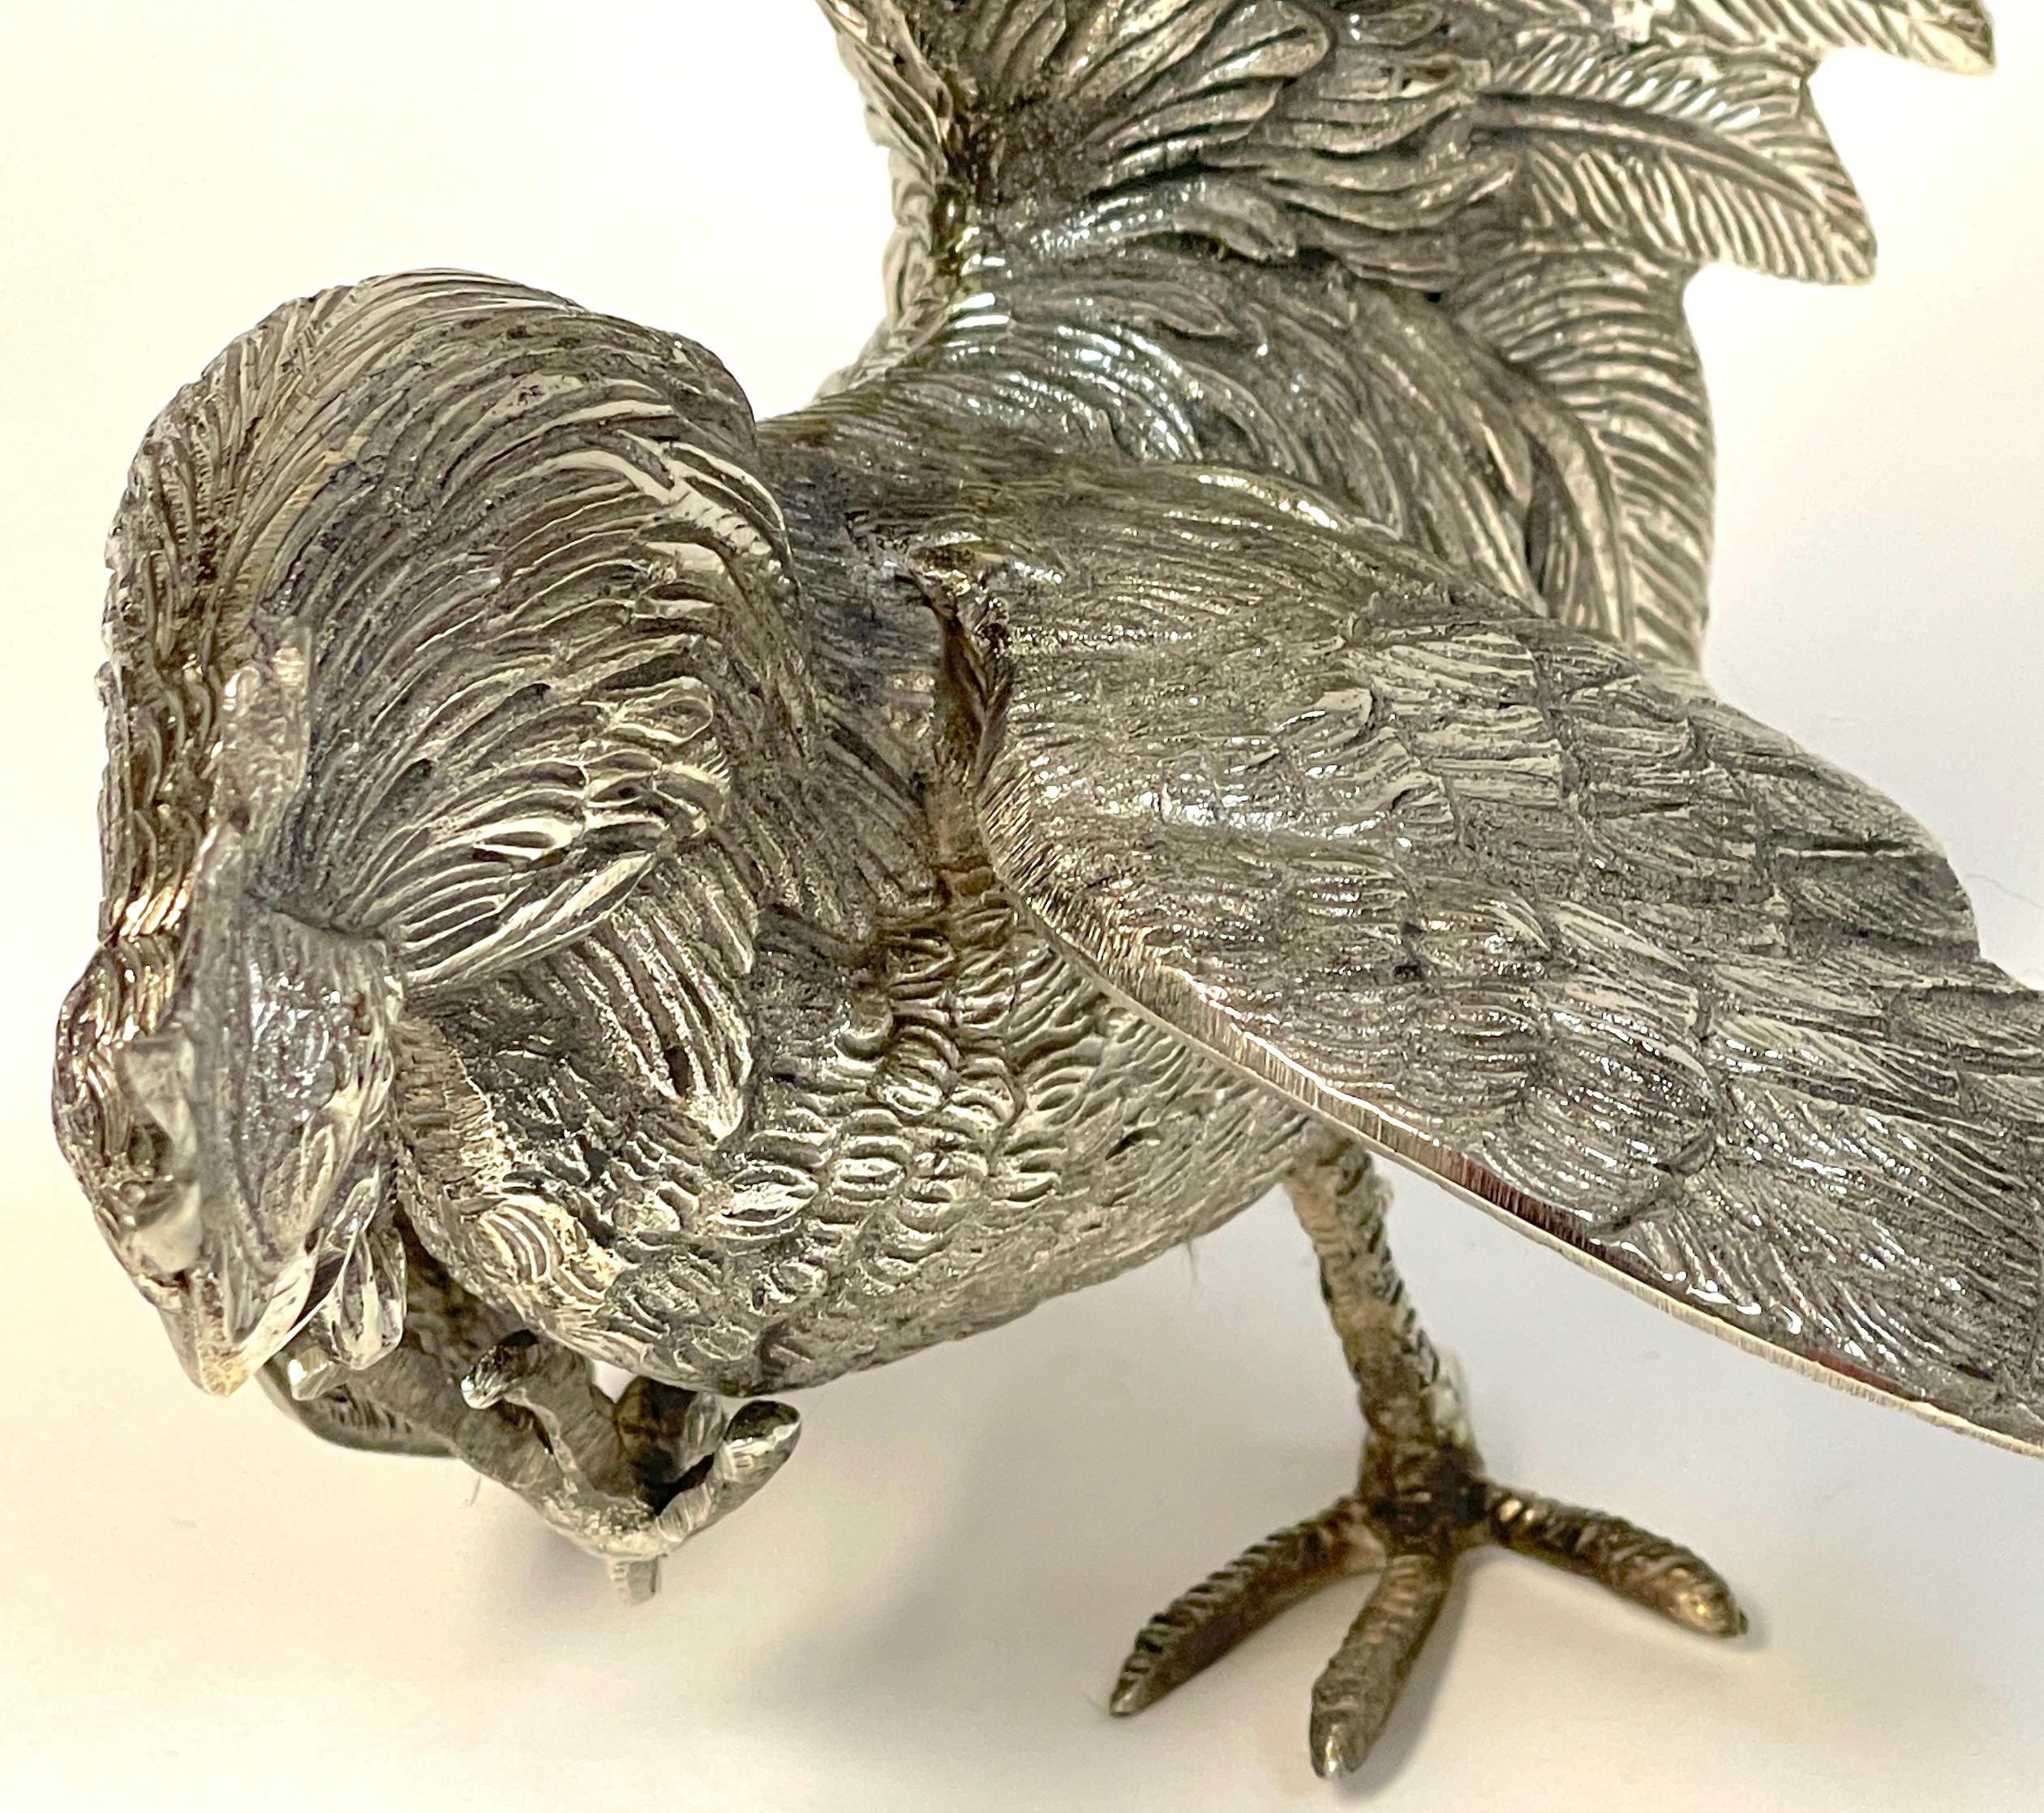 Pair of Italian Silverplated Rooster Table Ornaments 'Fighting Roosters' For Sale 6